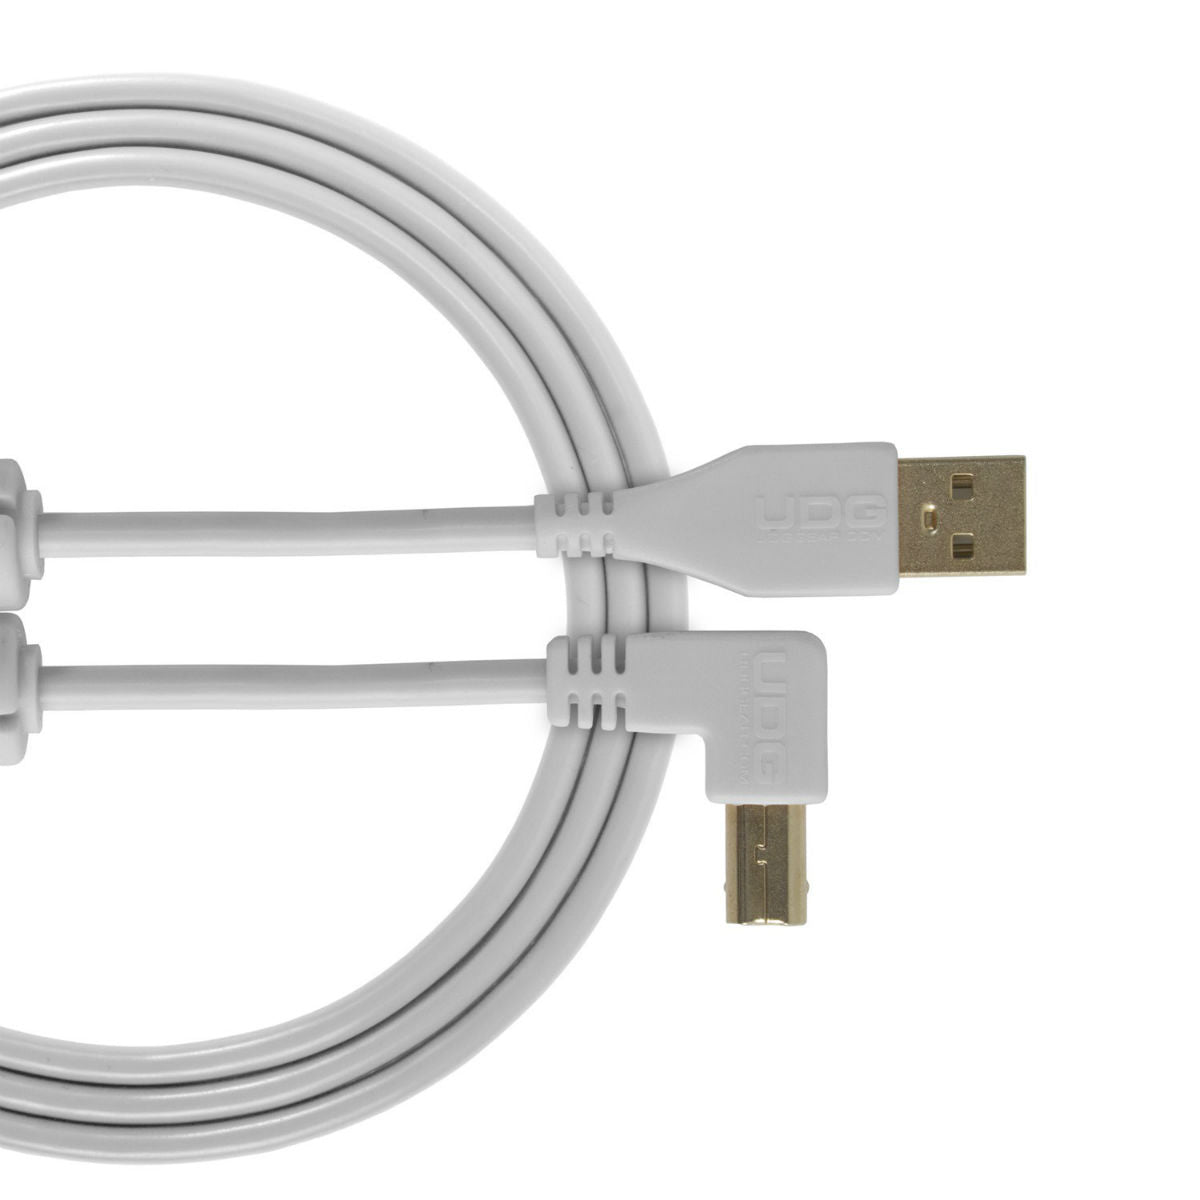 UDG USB Cable A-B 3m White Angled U95006WH